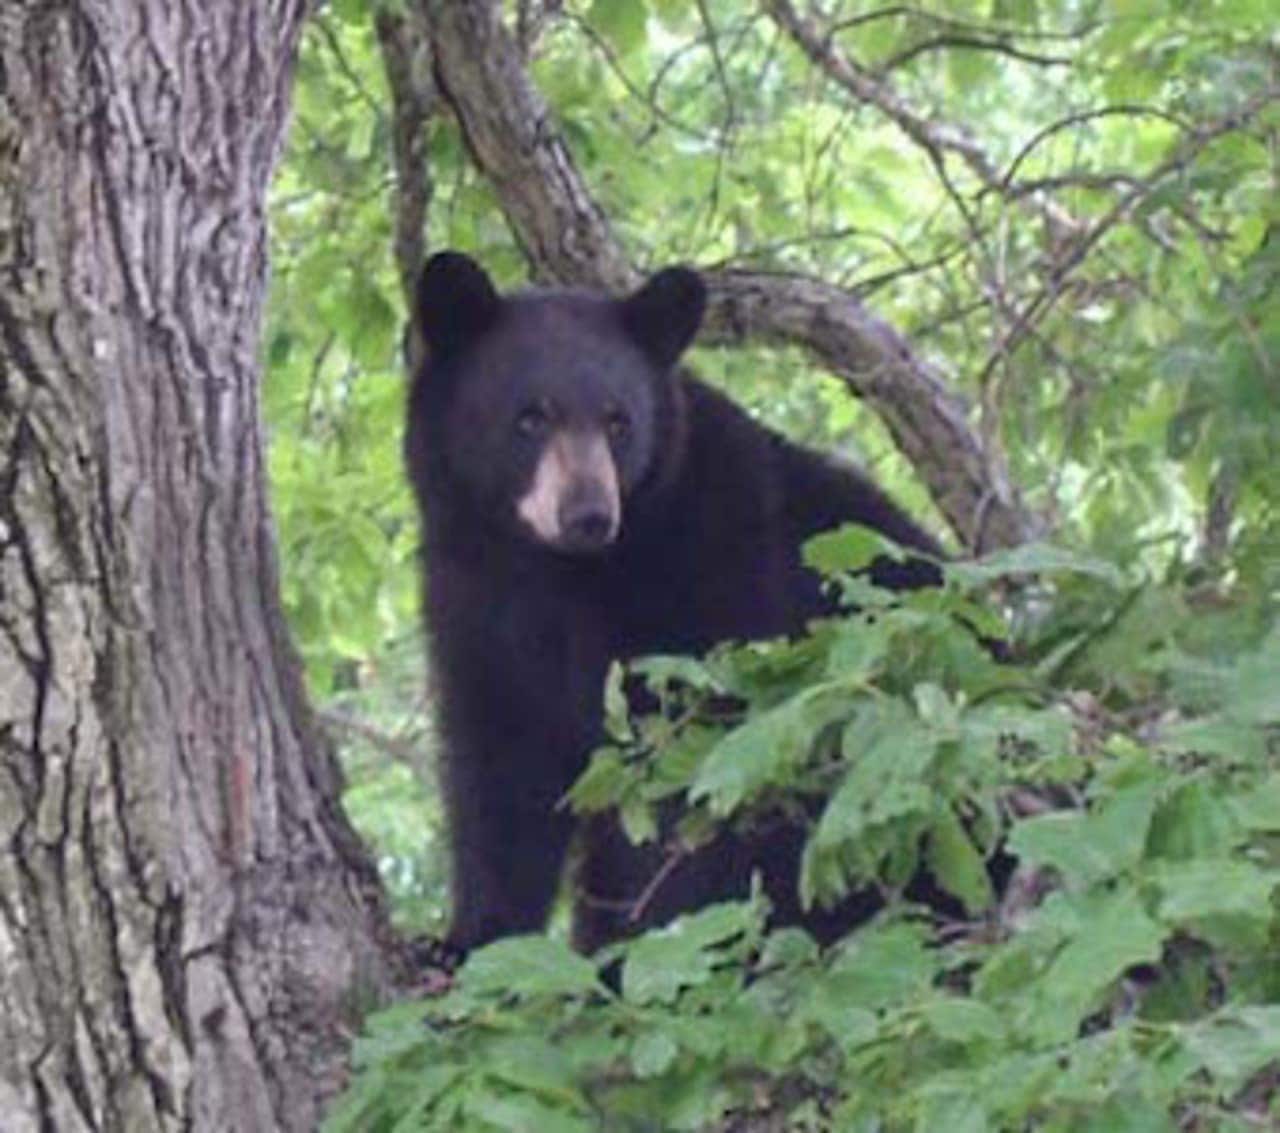 A black bear, similar to the one pictured, has been sighted throughout Easton.